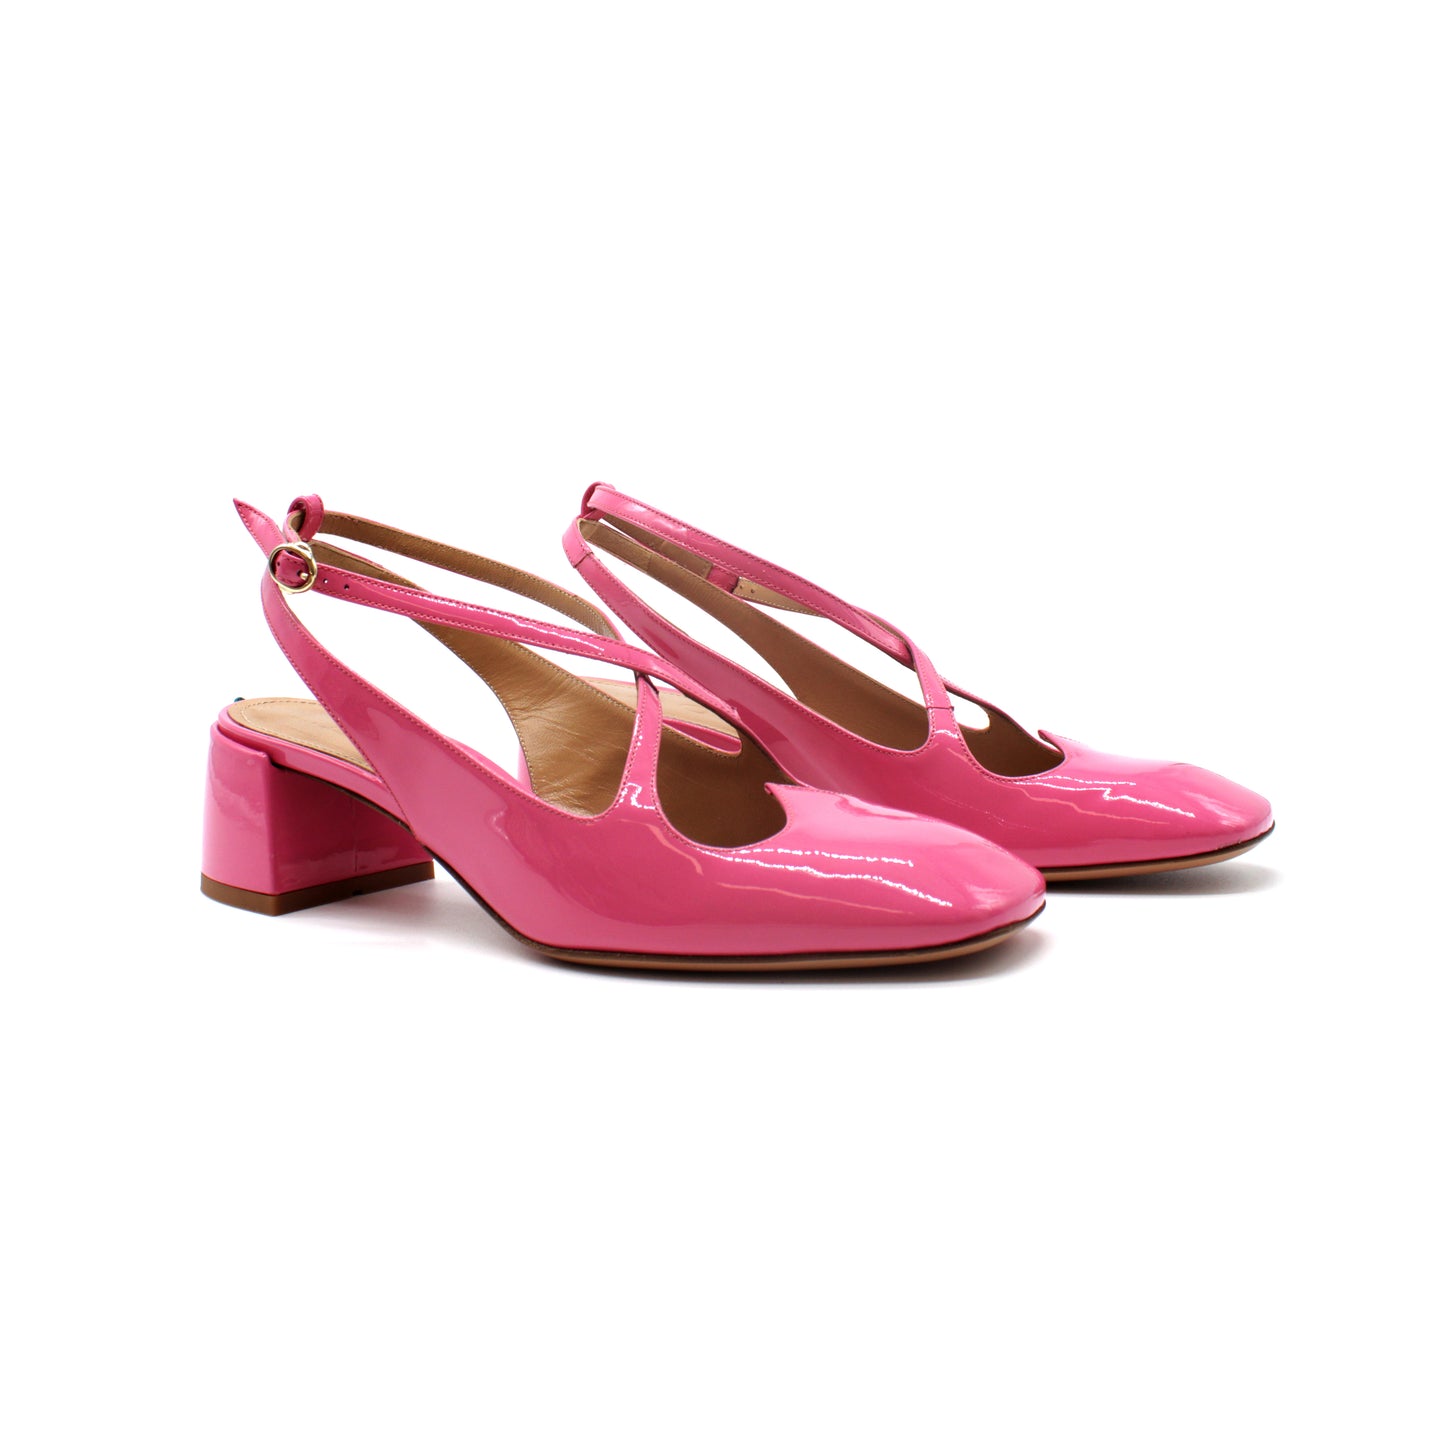 Sling Back Two for Love in vernice bubblegum - Second life